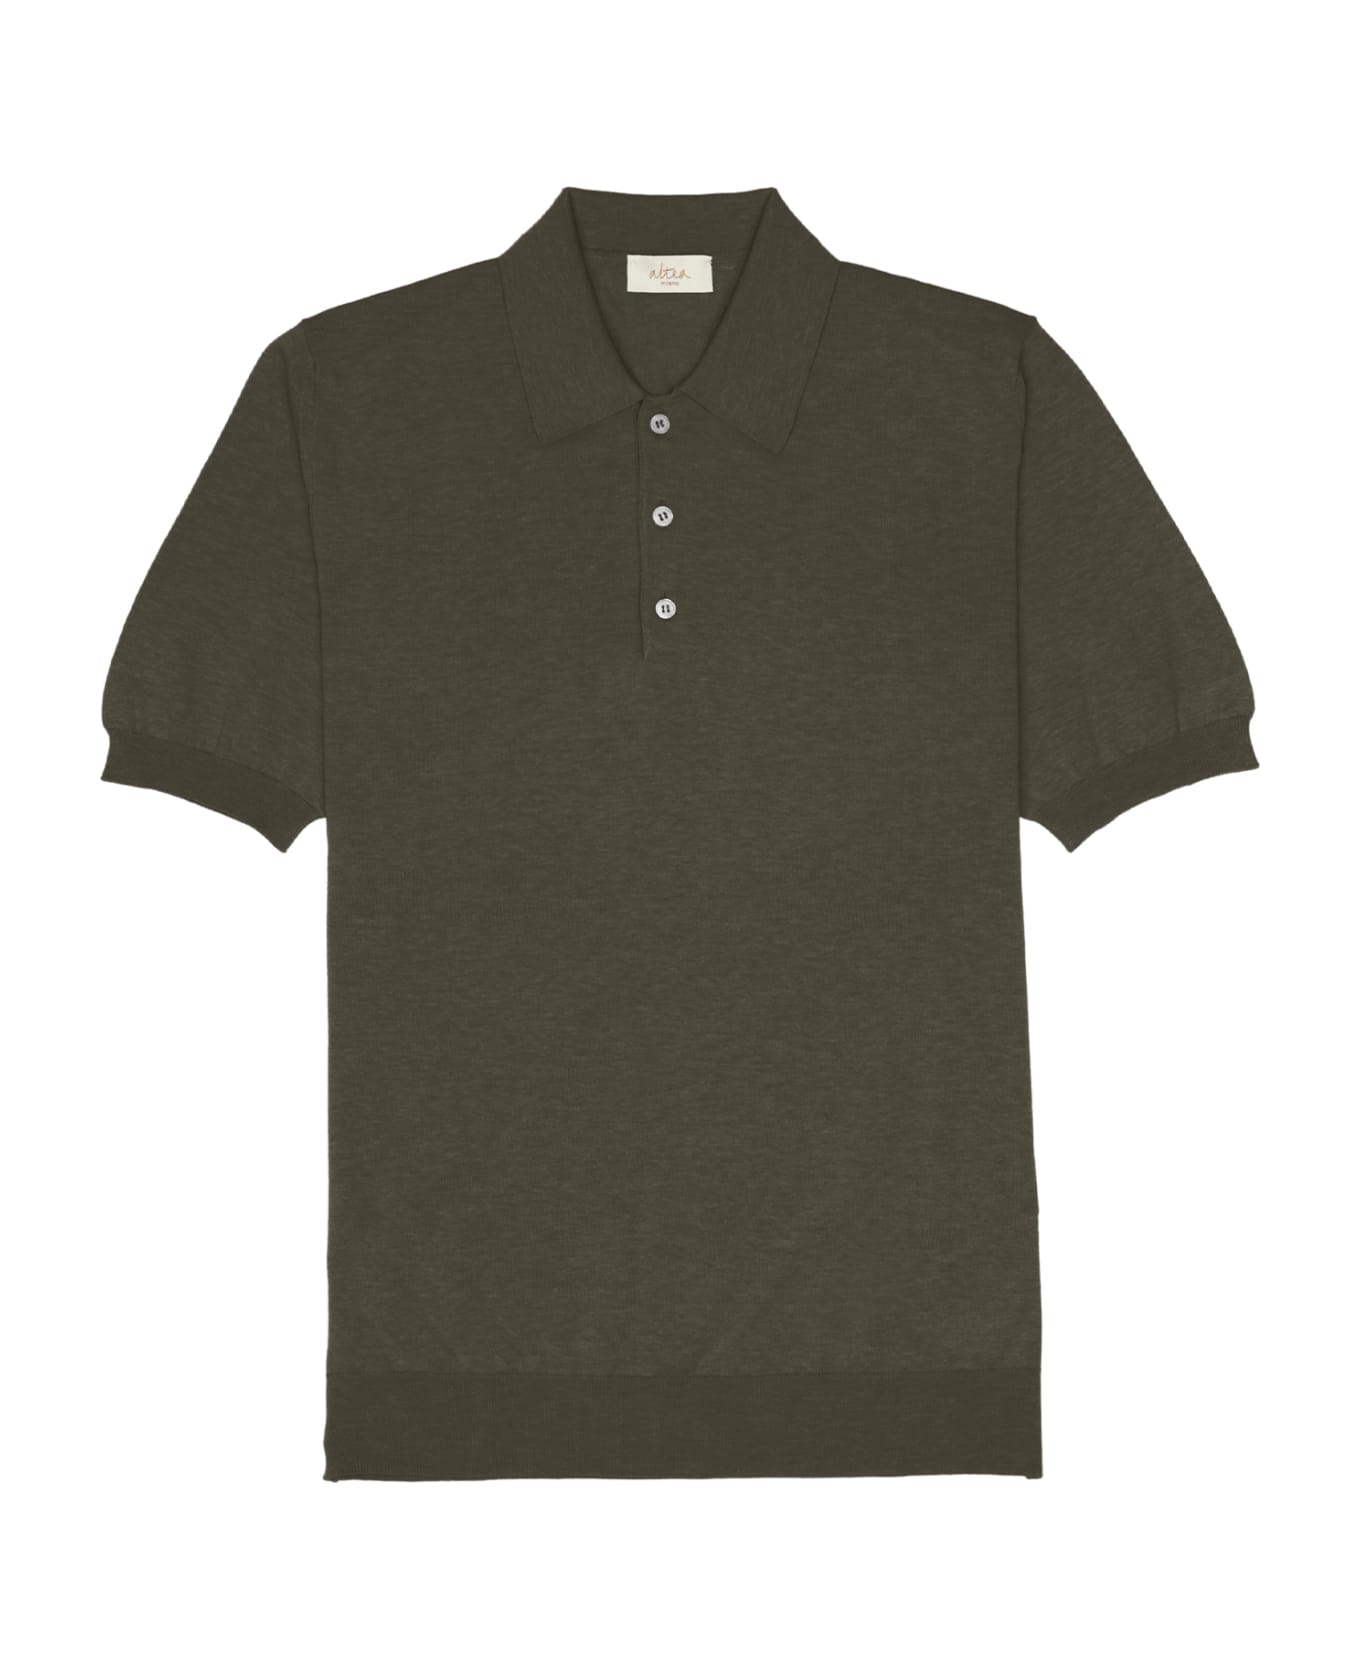 Altea Military Green Short-sleeved Polo Shirt In Cotton - MILITARE